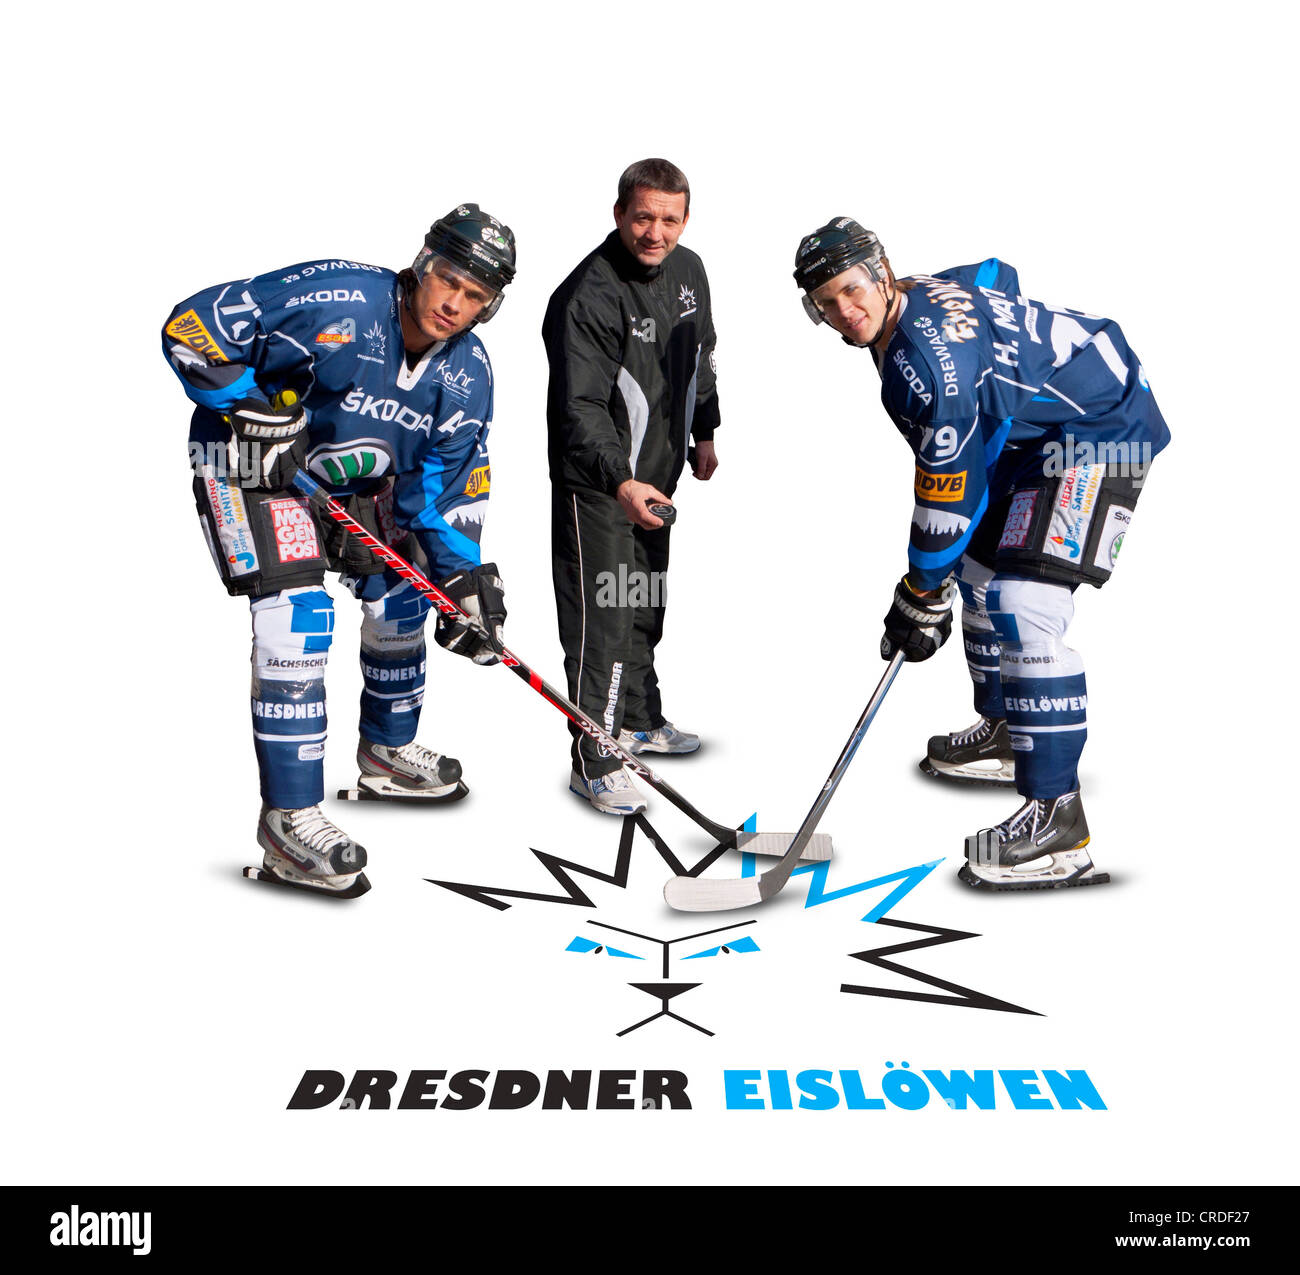 Patrick Strauch, ice hockey player, on the left, Thomas Popiesch, coach, in the middle, and Henry Martens, on the right, posing Stock Photo